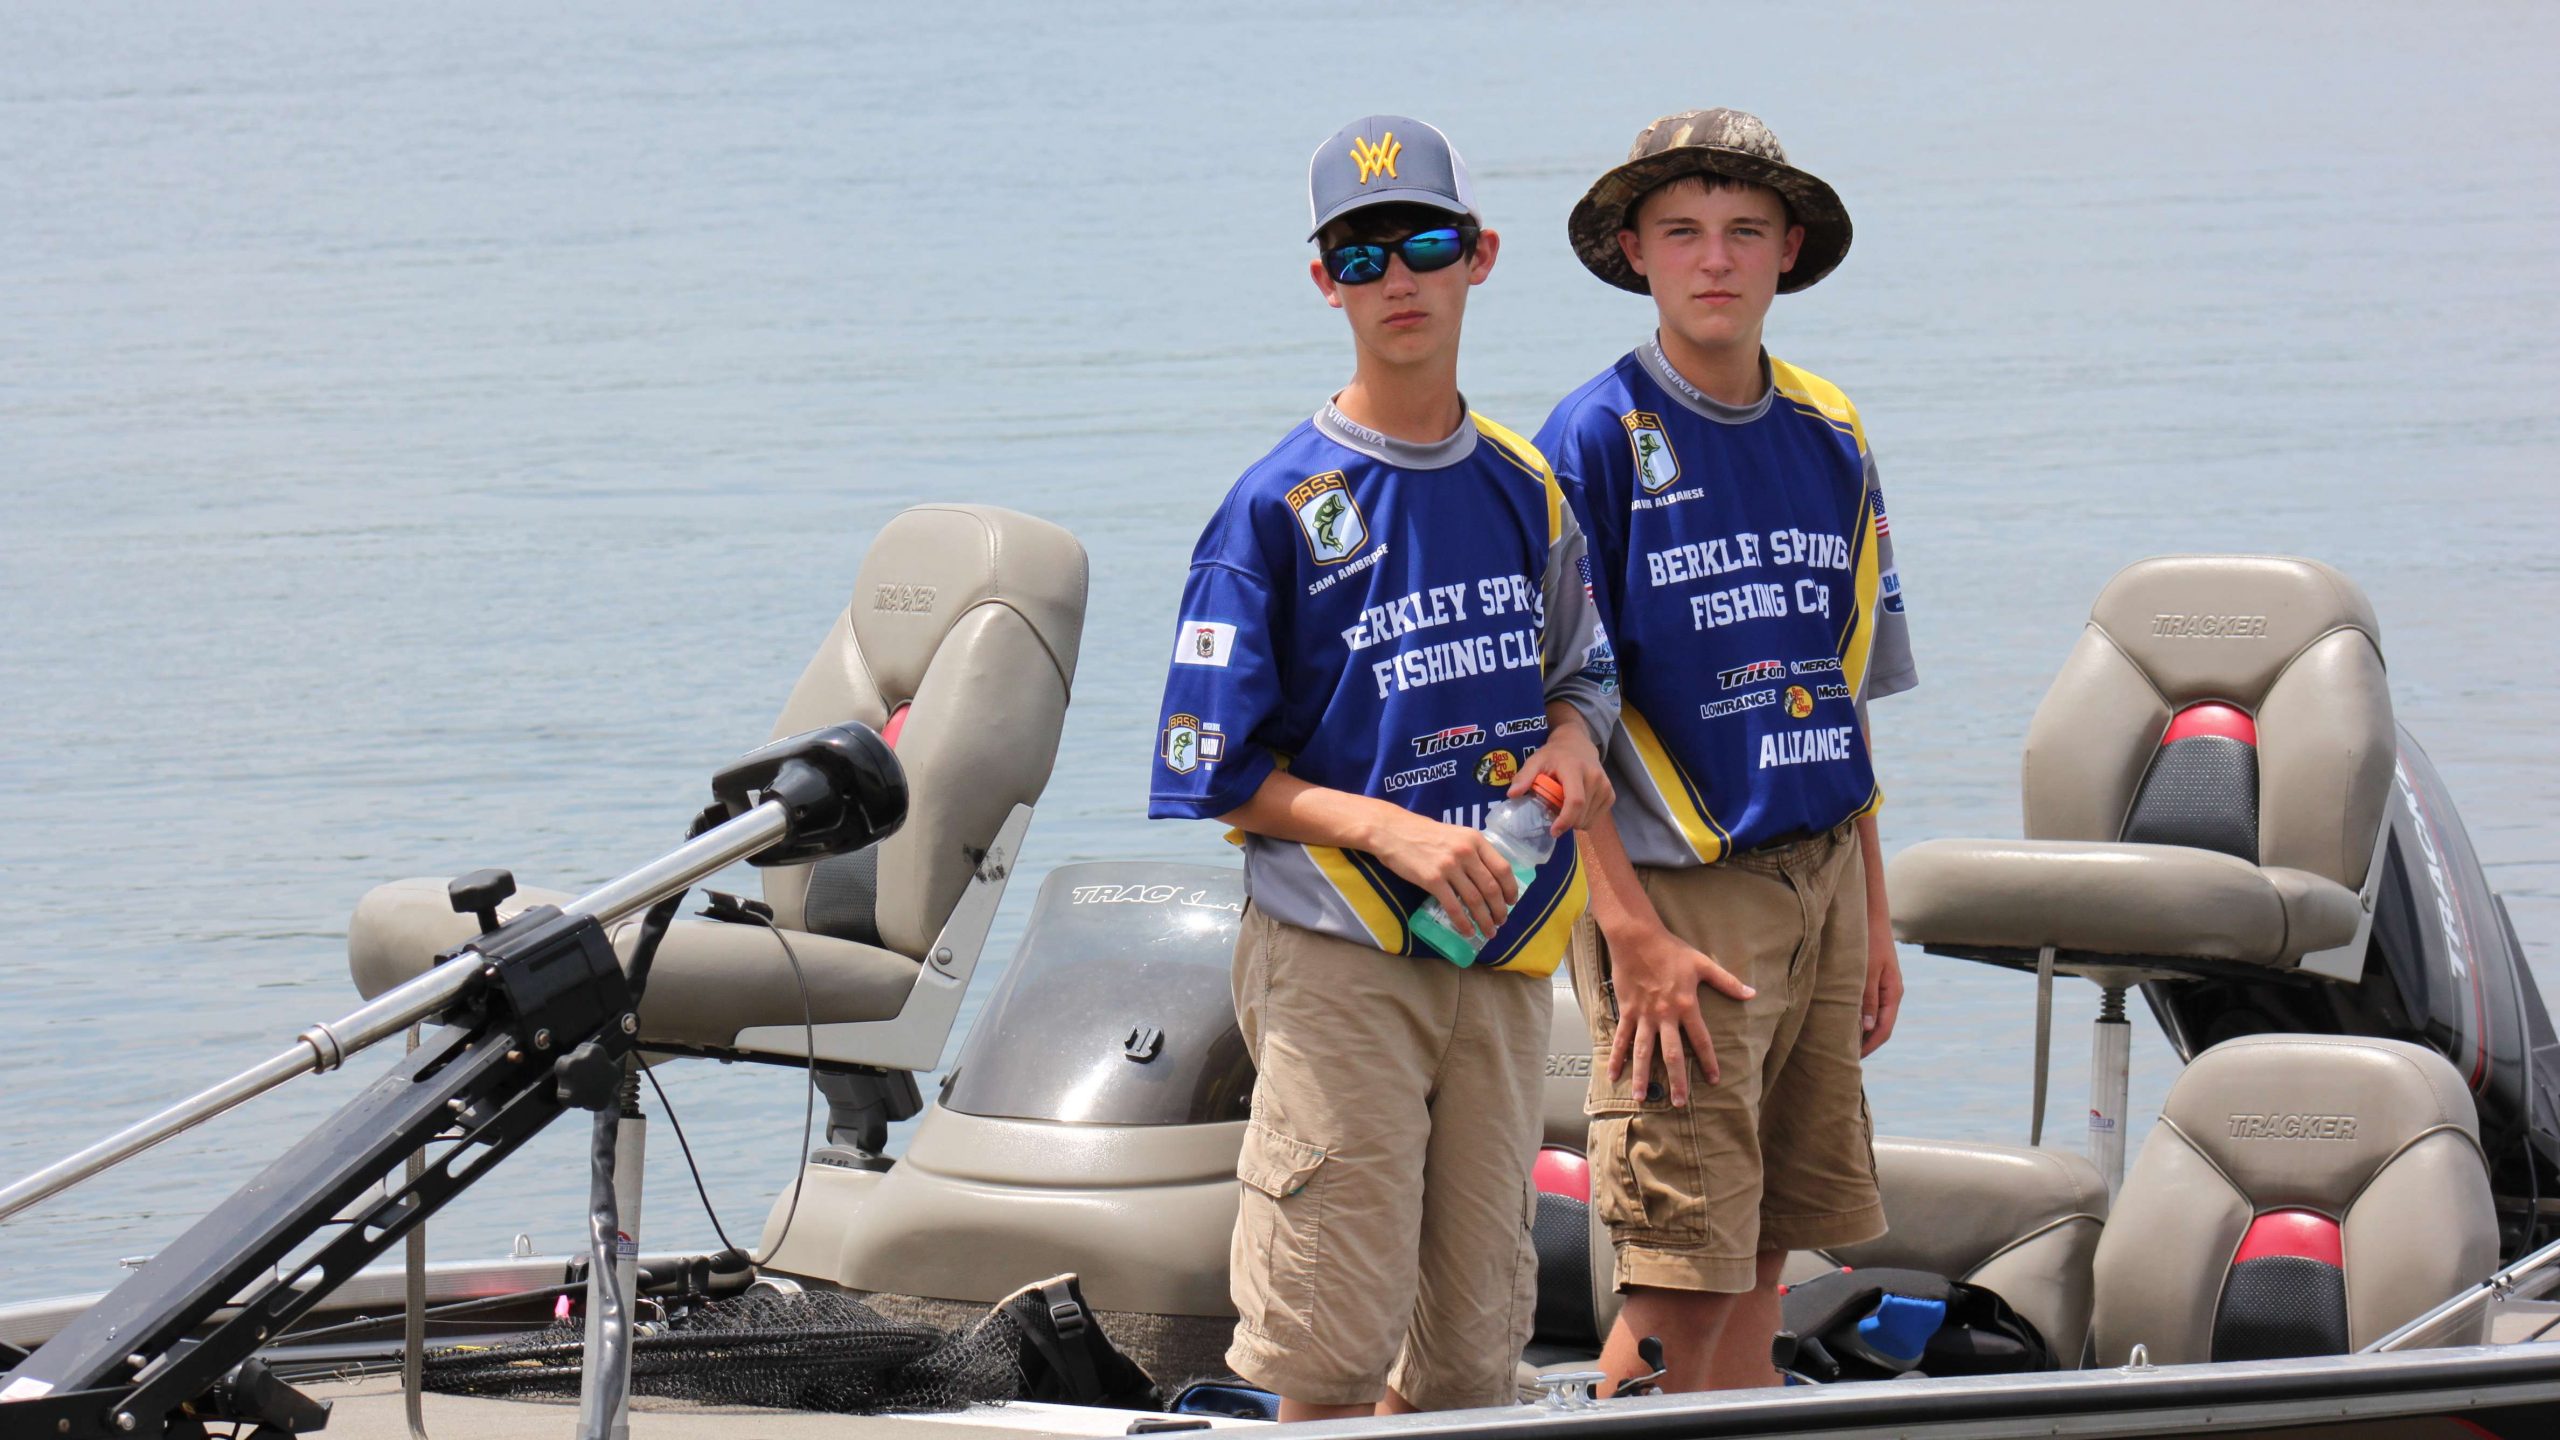 Samuel Ambrose and Trevor Albanese of Team West Virginia arrive at the ramps after Day 1 of fishing in the Costa Bassmaster Junior Championship on Carroll County 1,000 Acre Recreation Lake in Huntingdon, Tenn. It was about a 5-minute car ride from the launch site to downtown Huntingdon where the weigh-in was held on Aug. 2.